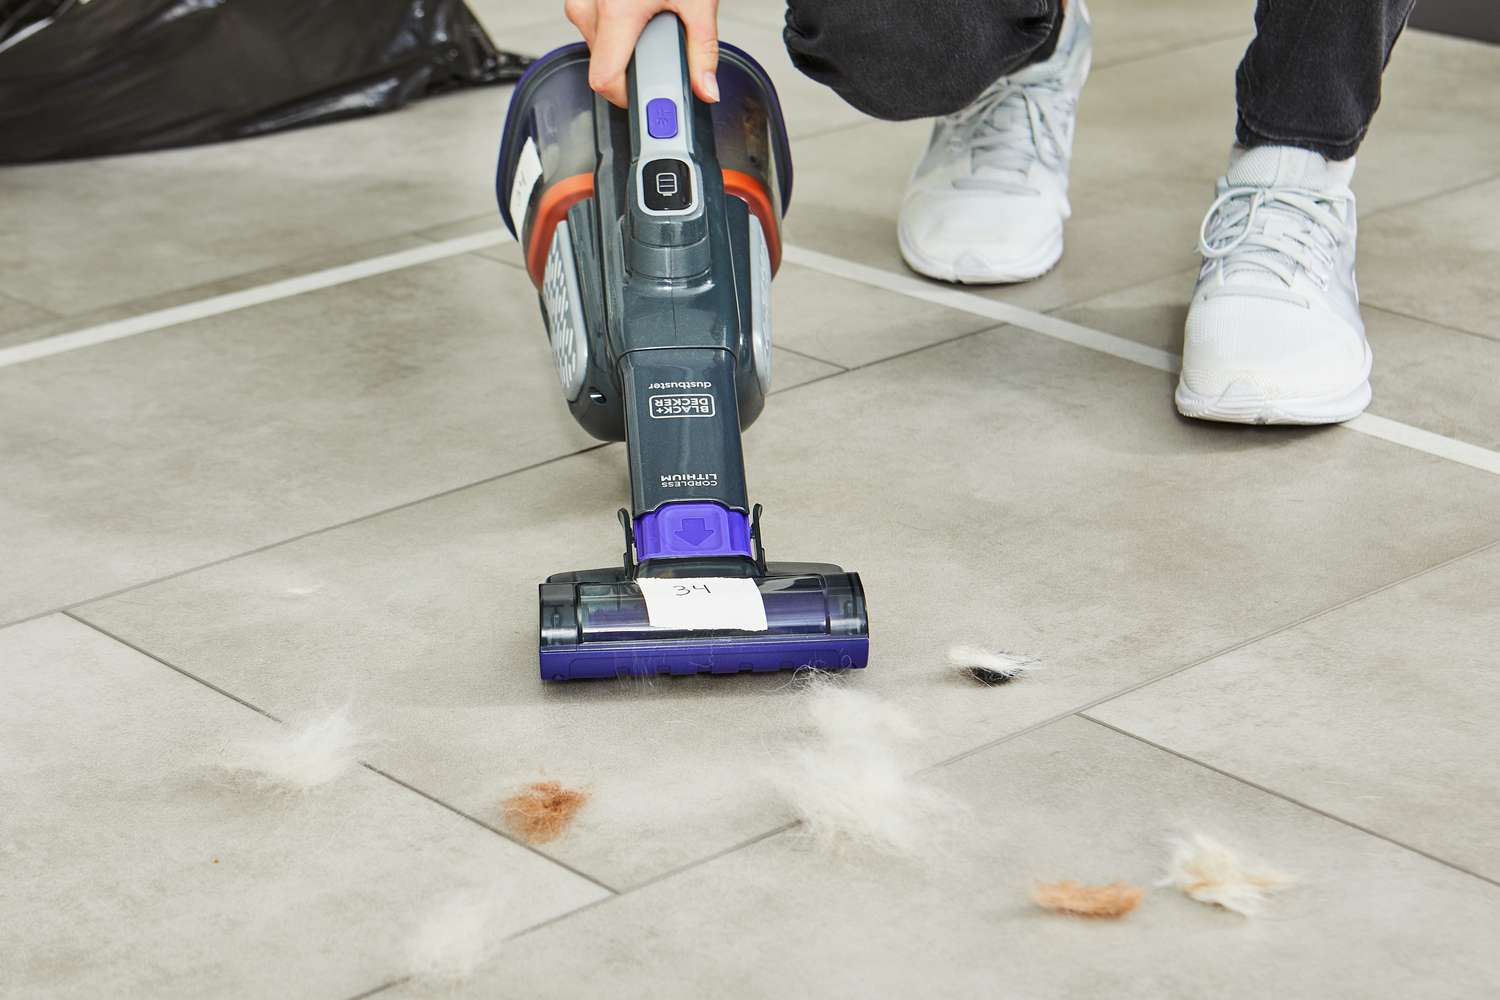 Hand using the Black+Decker Dustbuster AdvancedClean+ Pet Cordless Hand Vacuum Cleaner to clean pet hair from a tile floor